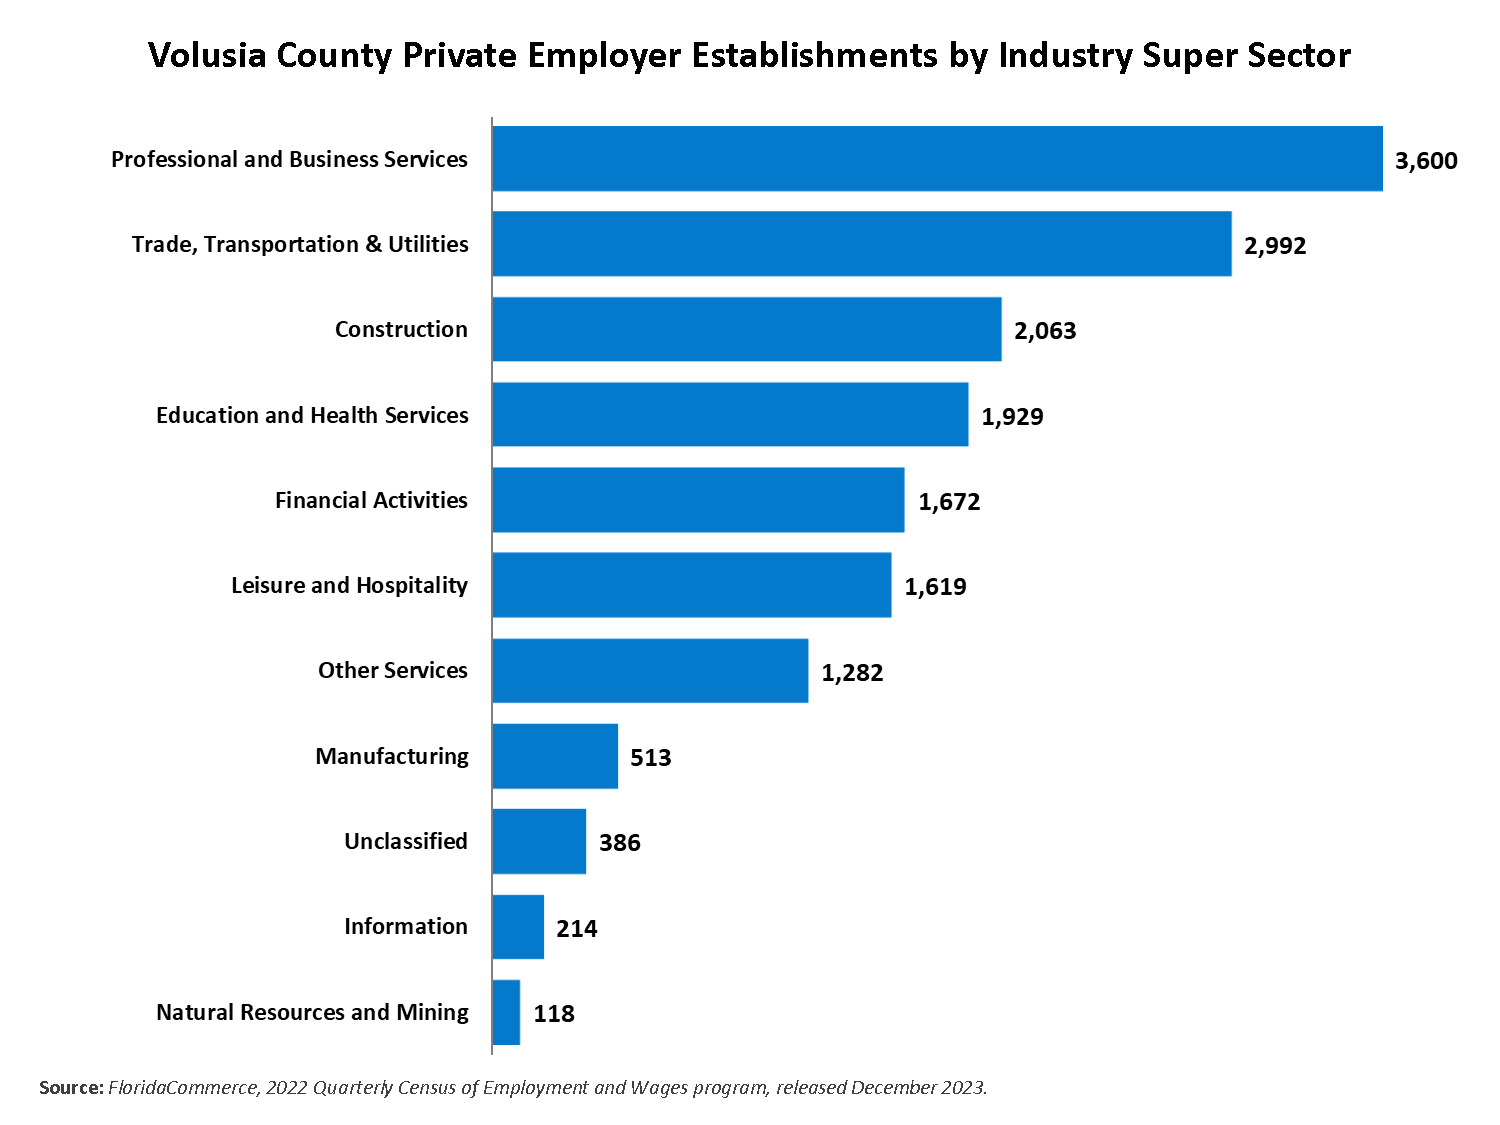 The chart shows the 2022 Volusia County Private employer establishments by Super Sector. The sector with the largest number of establishments was Professional and Business Services at 3,600. Trade, Transportation, and Utilities had 2,992. Construction 2,063. Education and Health Services 1,929. Financial Activities 1,672. Leisure and Hospitality 1,619. Other Services 1,282. Manufacturing 513. Unclassified 386. Information 214. Natural Resources and Mining had the lowest number of establishments at 118.